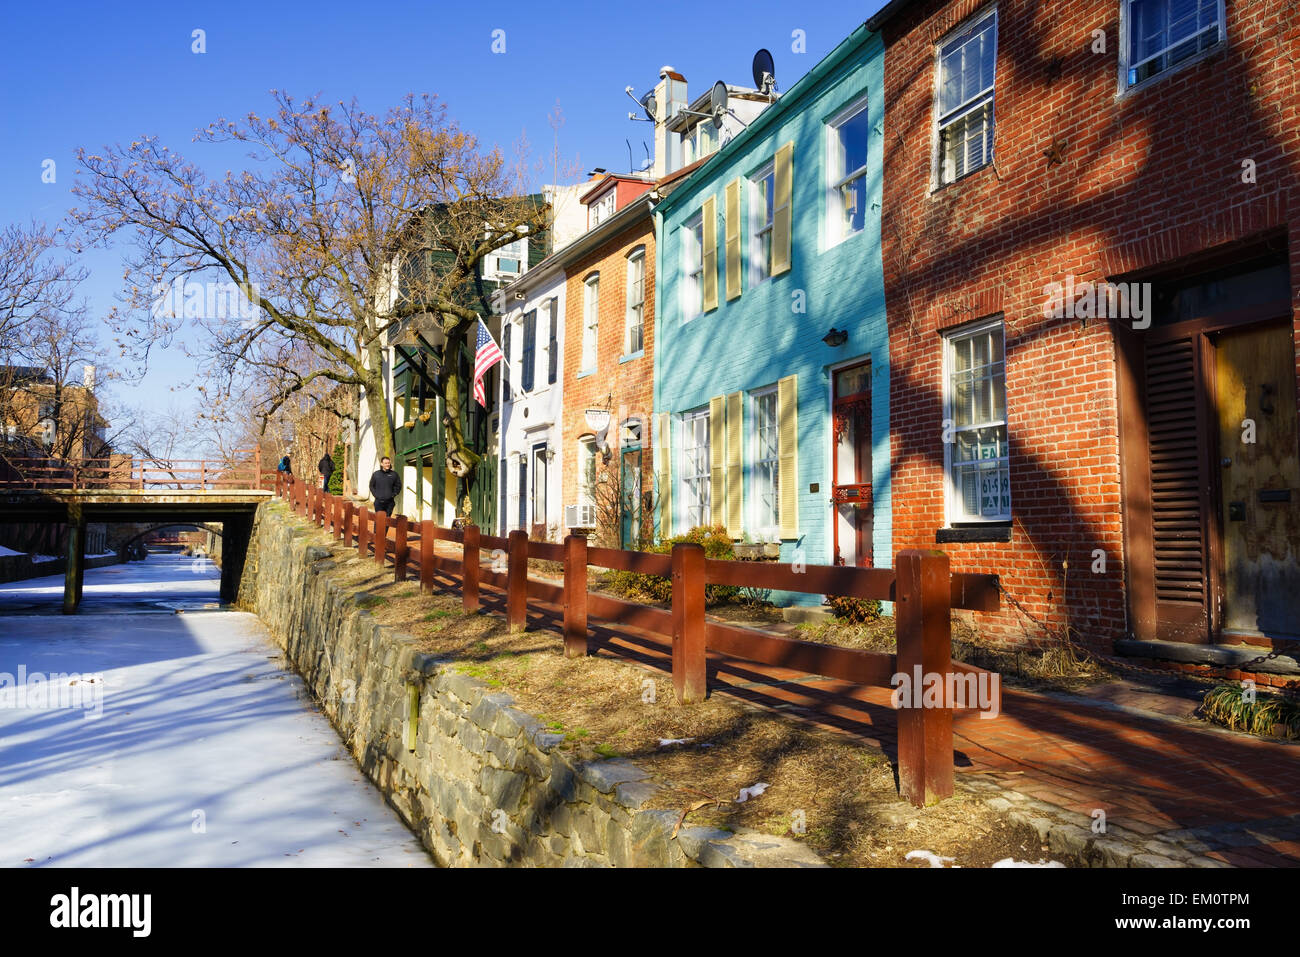 Colorful old houses beside the Chesapeake and Ohio (C&O) canal in the historic area of Georgetown, Washington DC, USA. Stock Photo